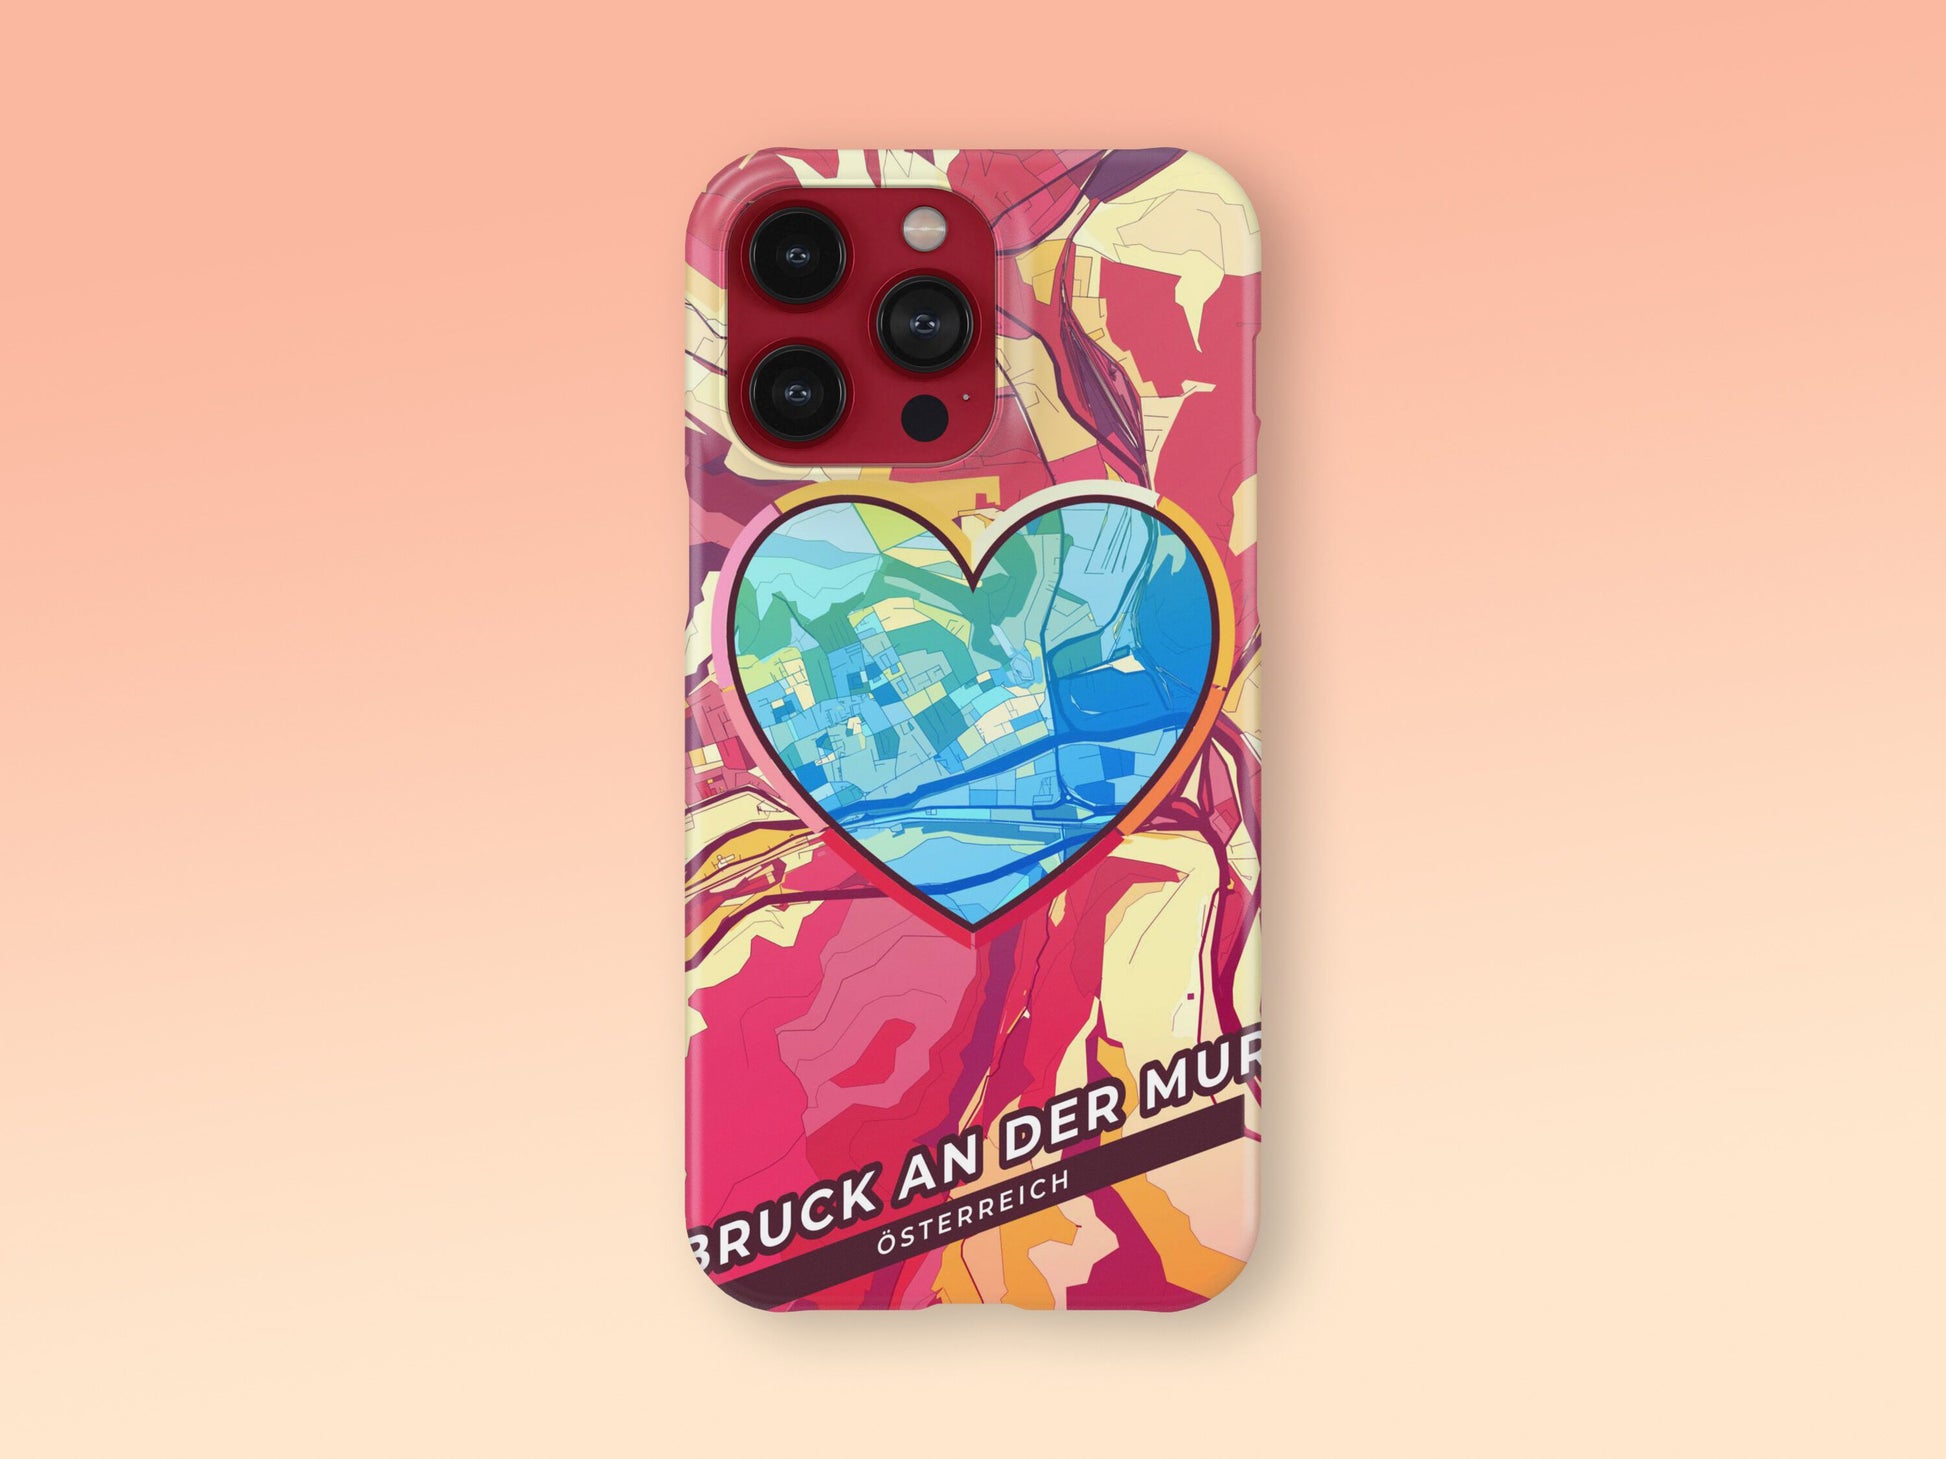 Bruck An Der Mur Österreich slim phone case with colorful icon. Birthday, wedding or housewarming gift. Couple match cases. 2